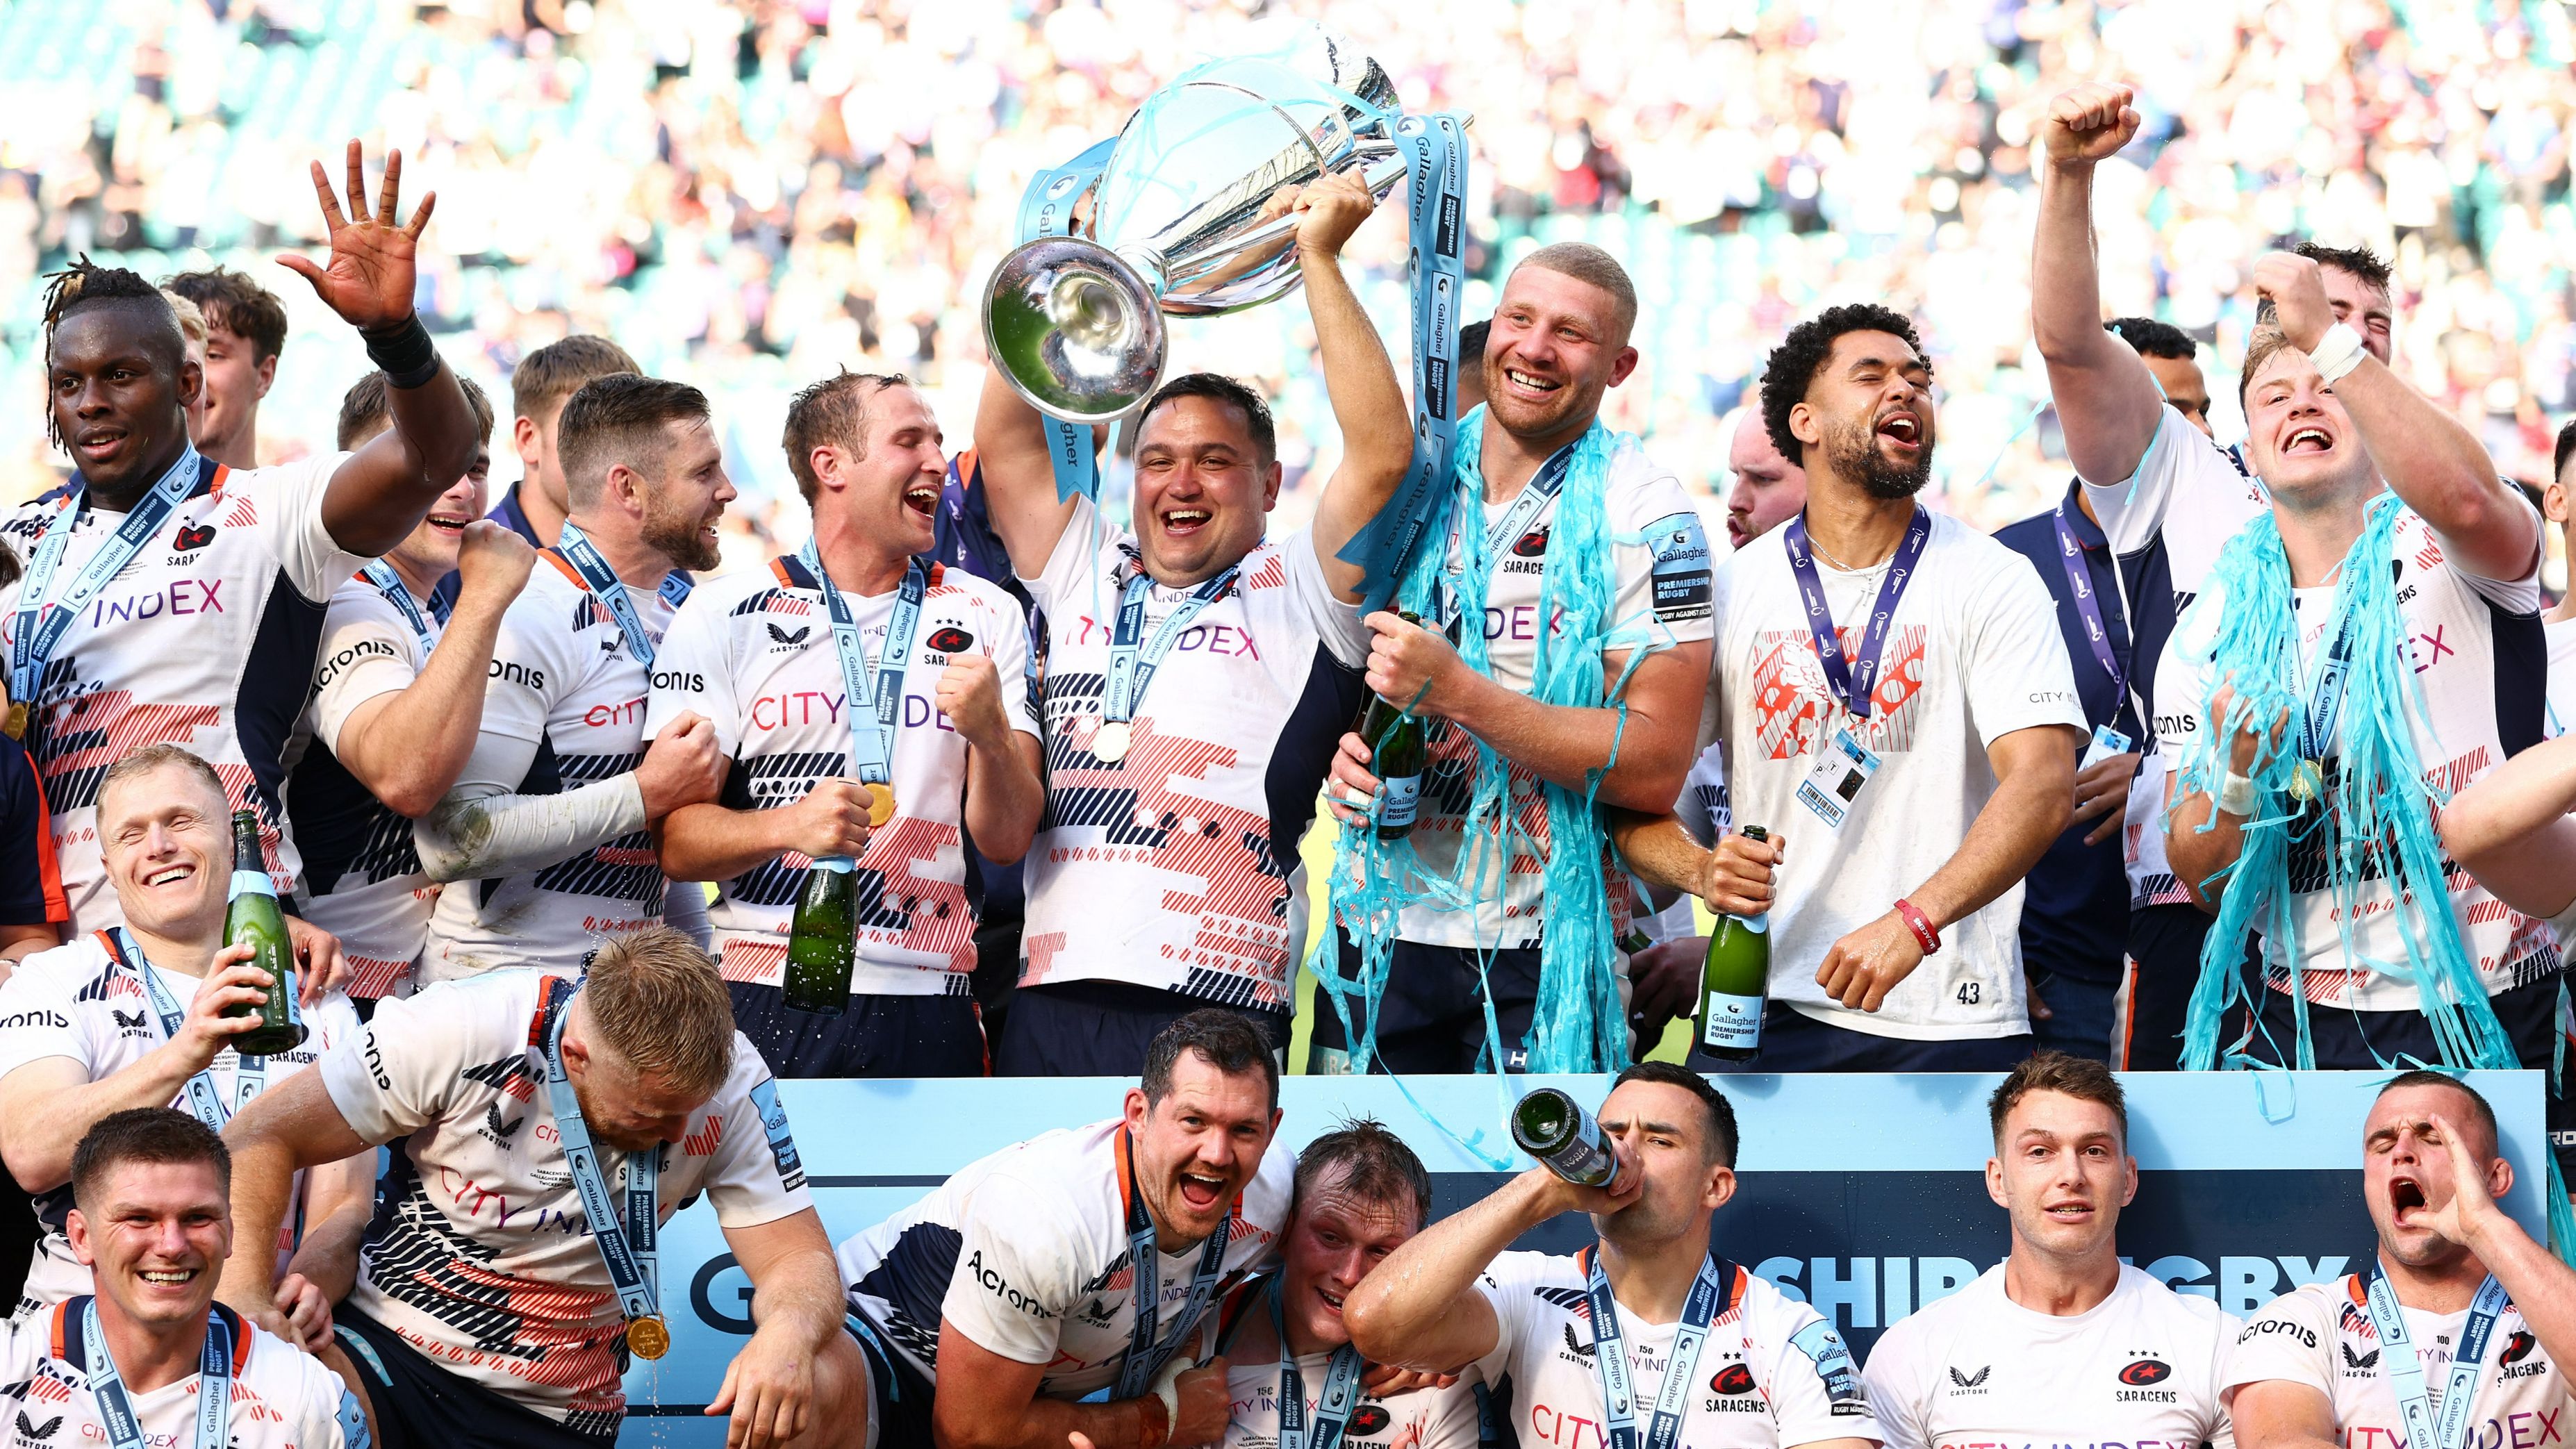 Premiership LIVE Saracens v Sale Sharks in play-off final - listen and follow live text updates - Live